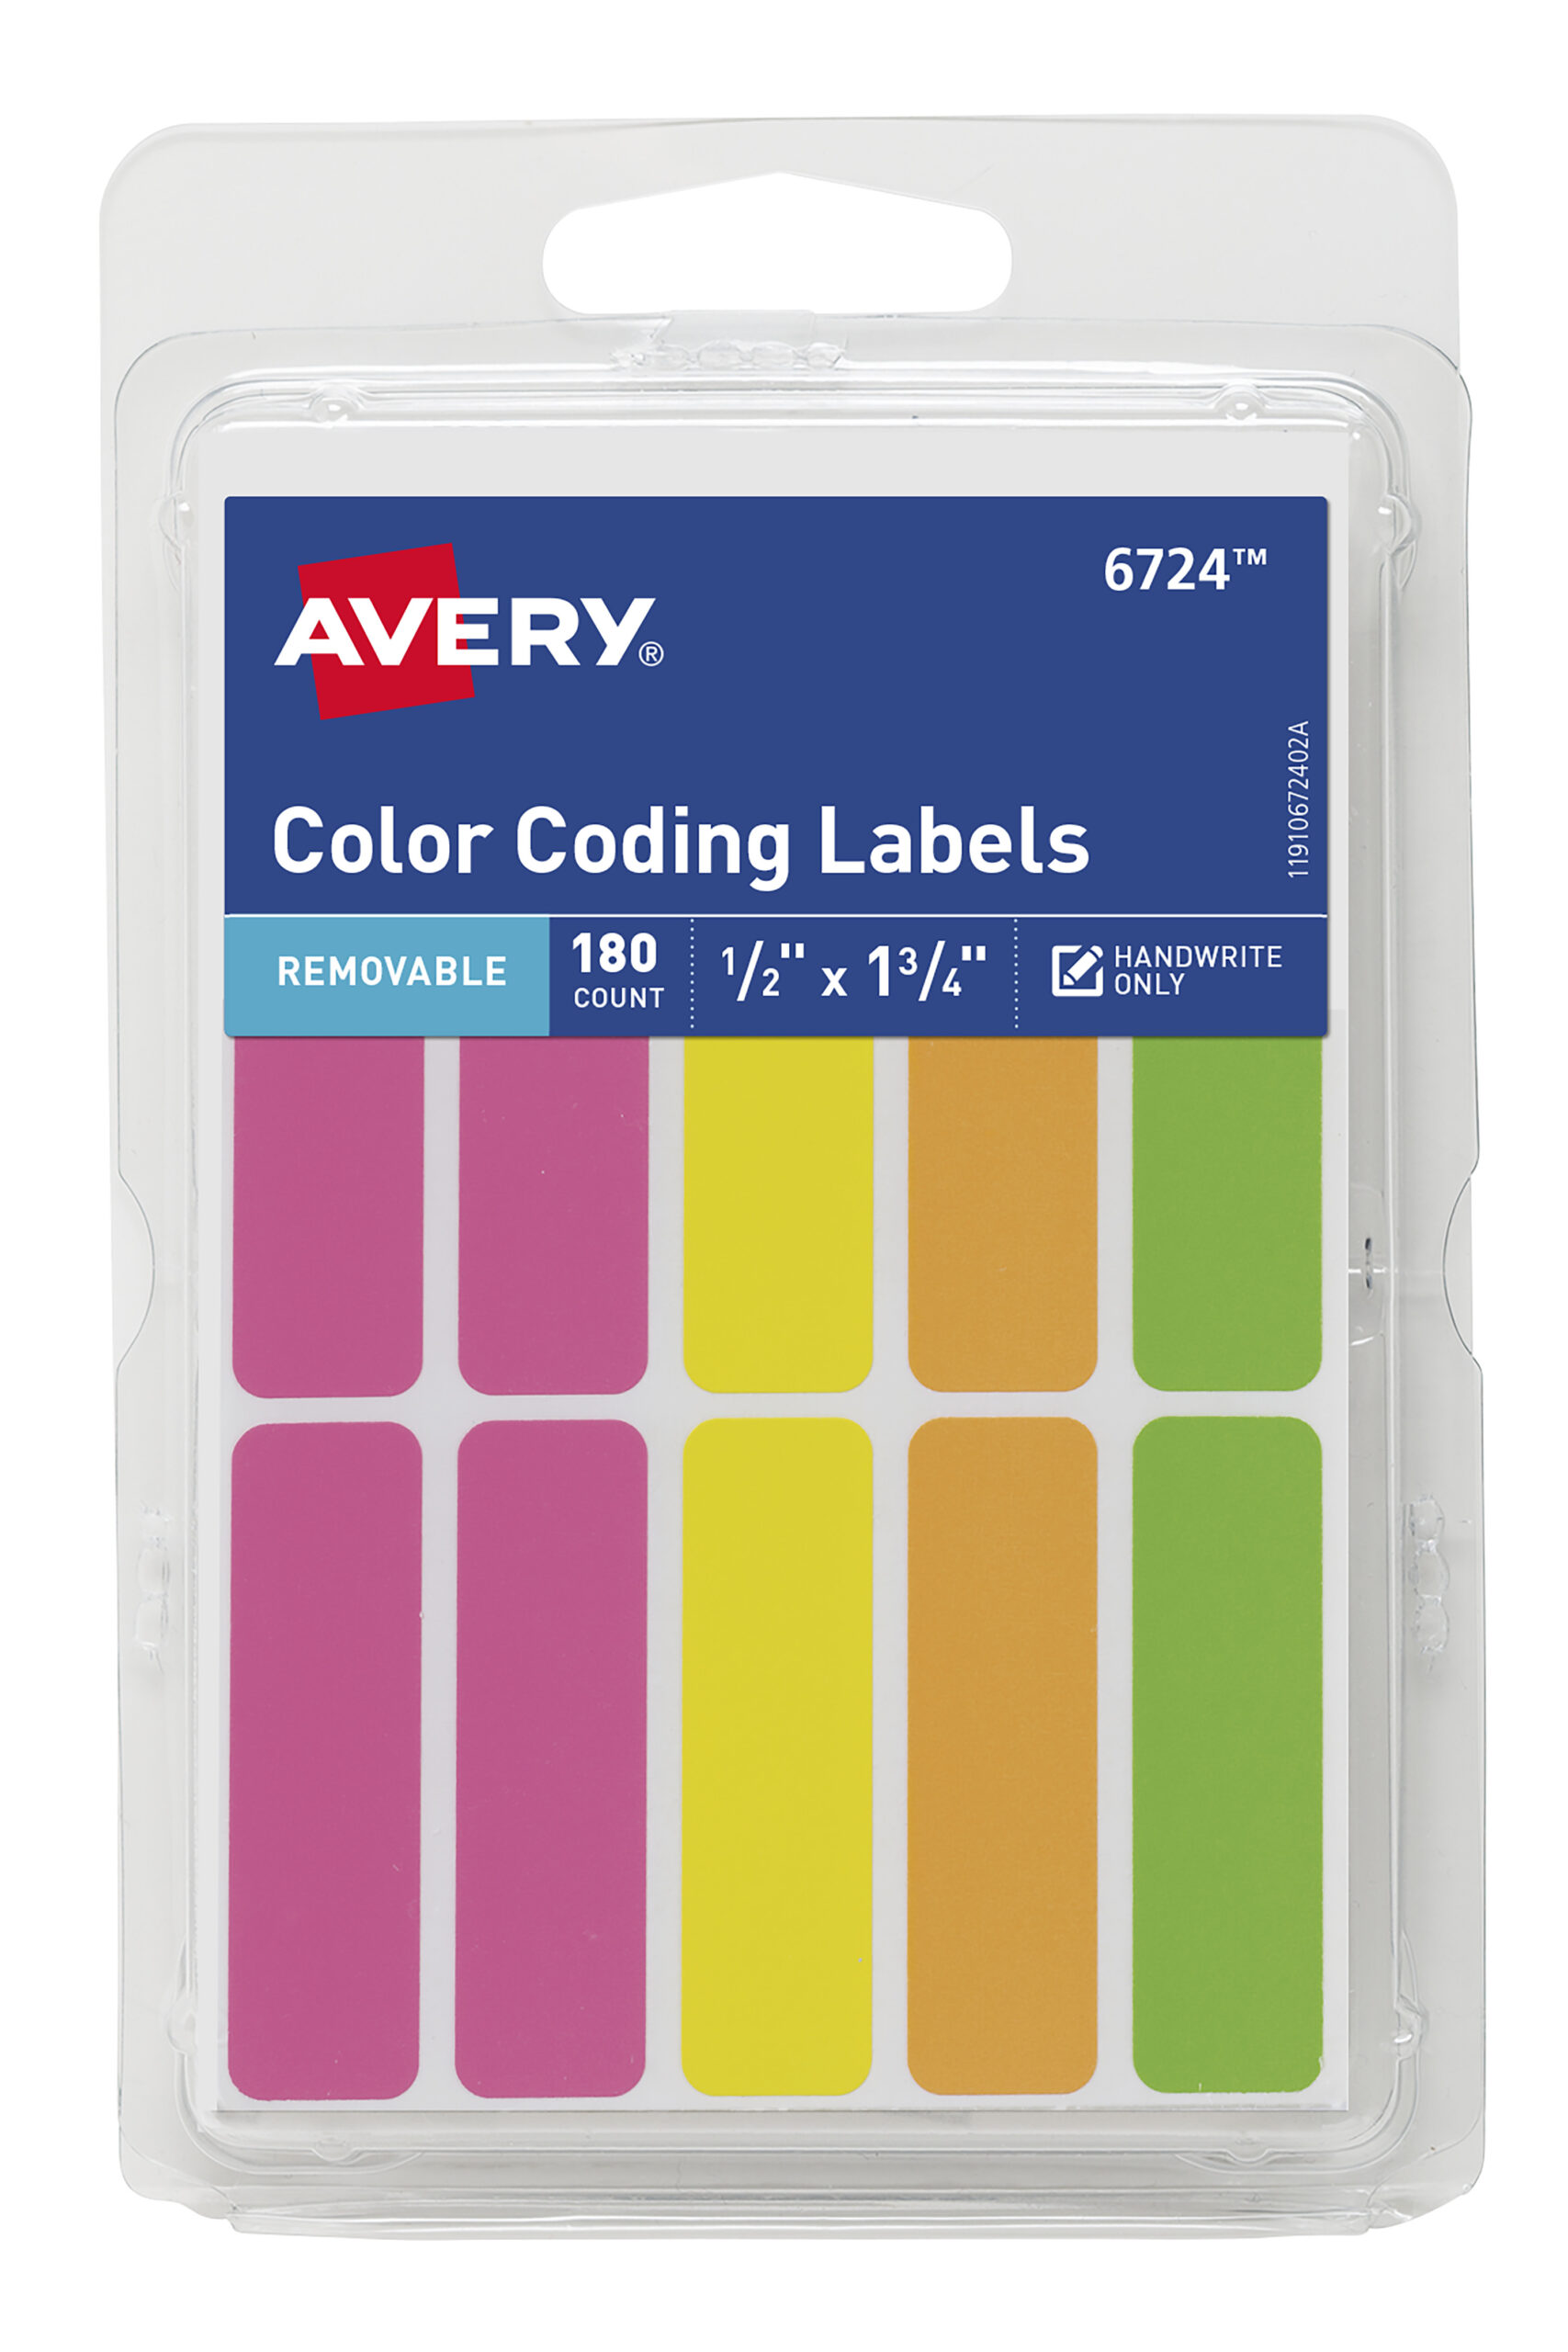 Avery Color Coding Labels Removable Adhesive 1 2 X 1 3 4 180 Labels 